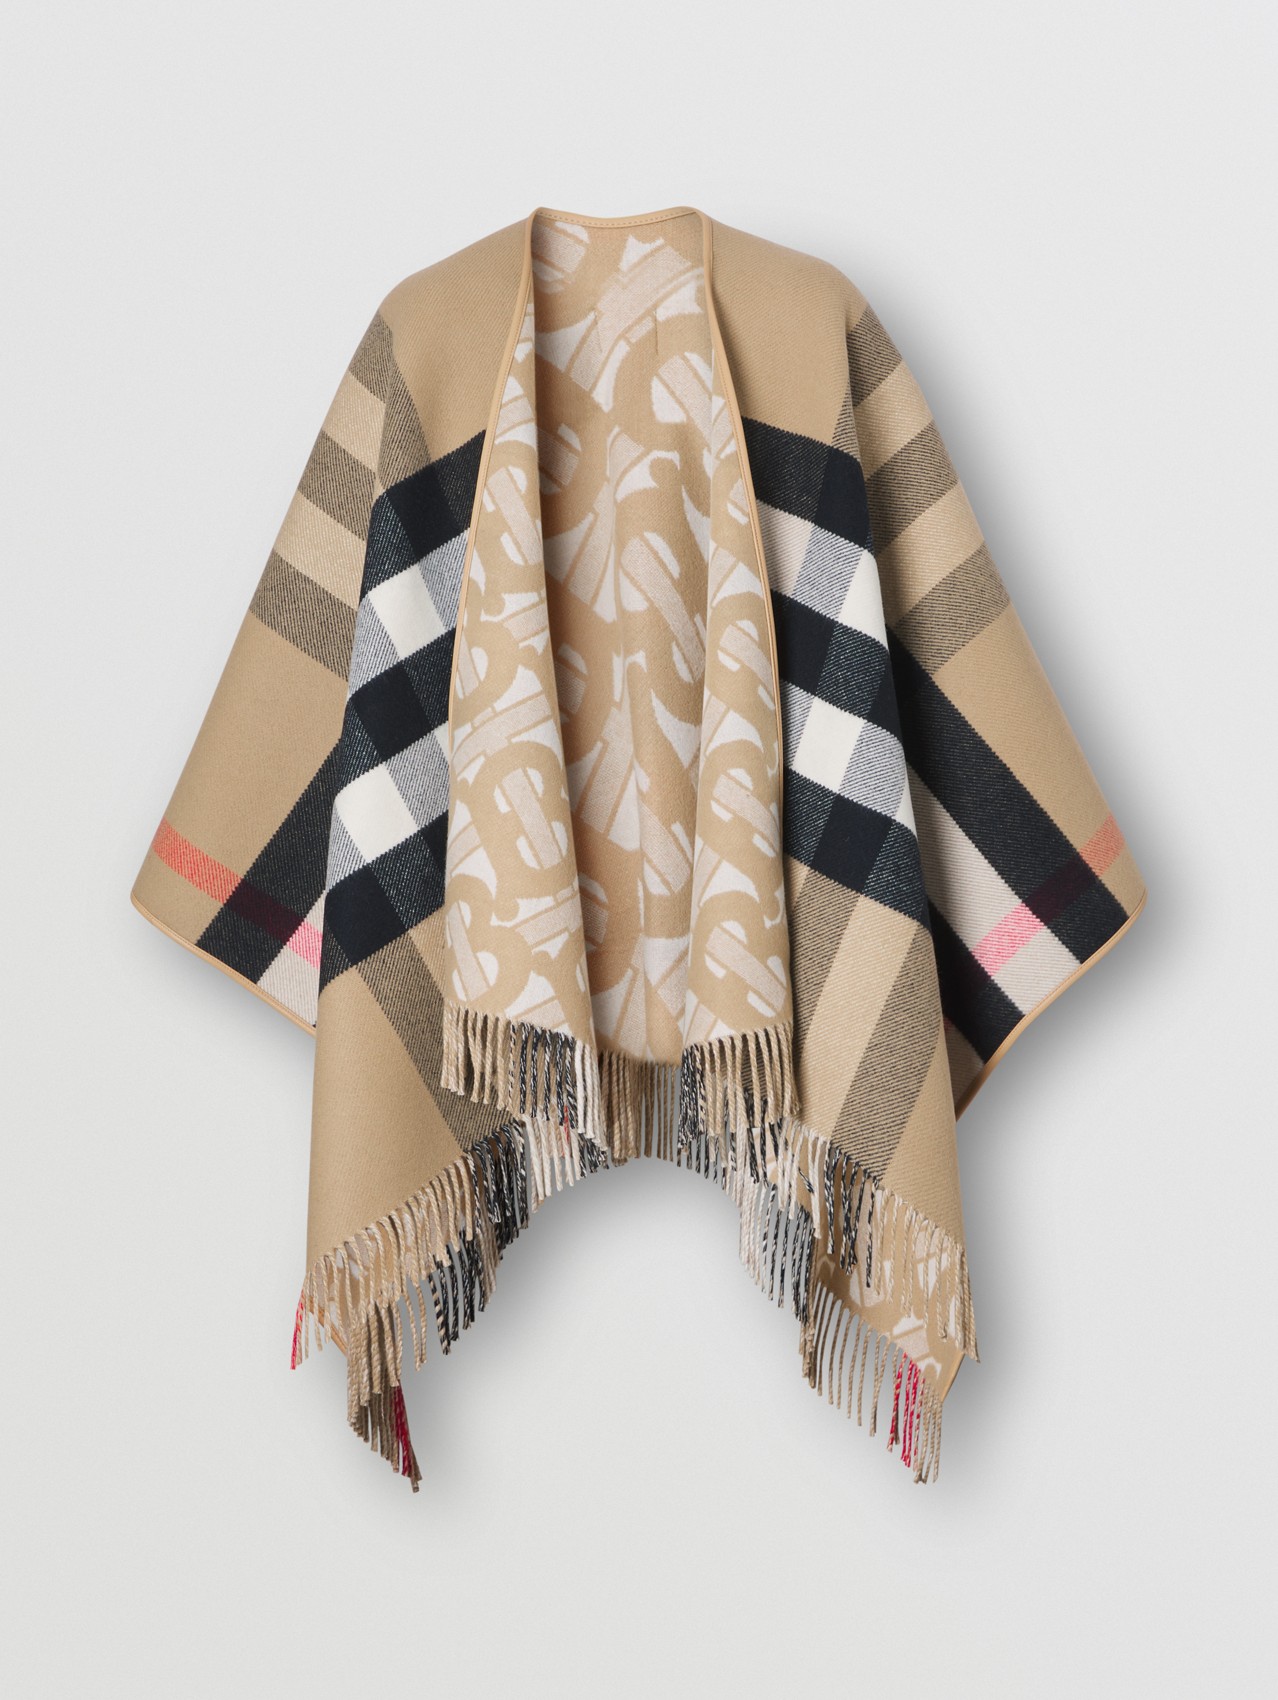 Reversible Monogram Wool Cashmere Jacquard Cape in Archive Beige